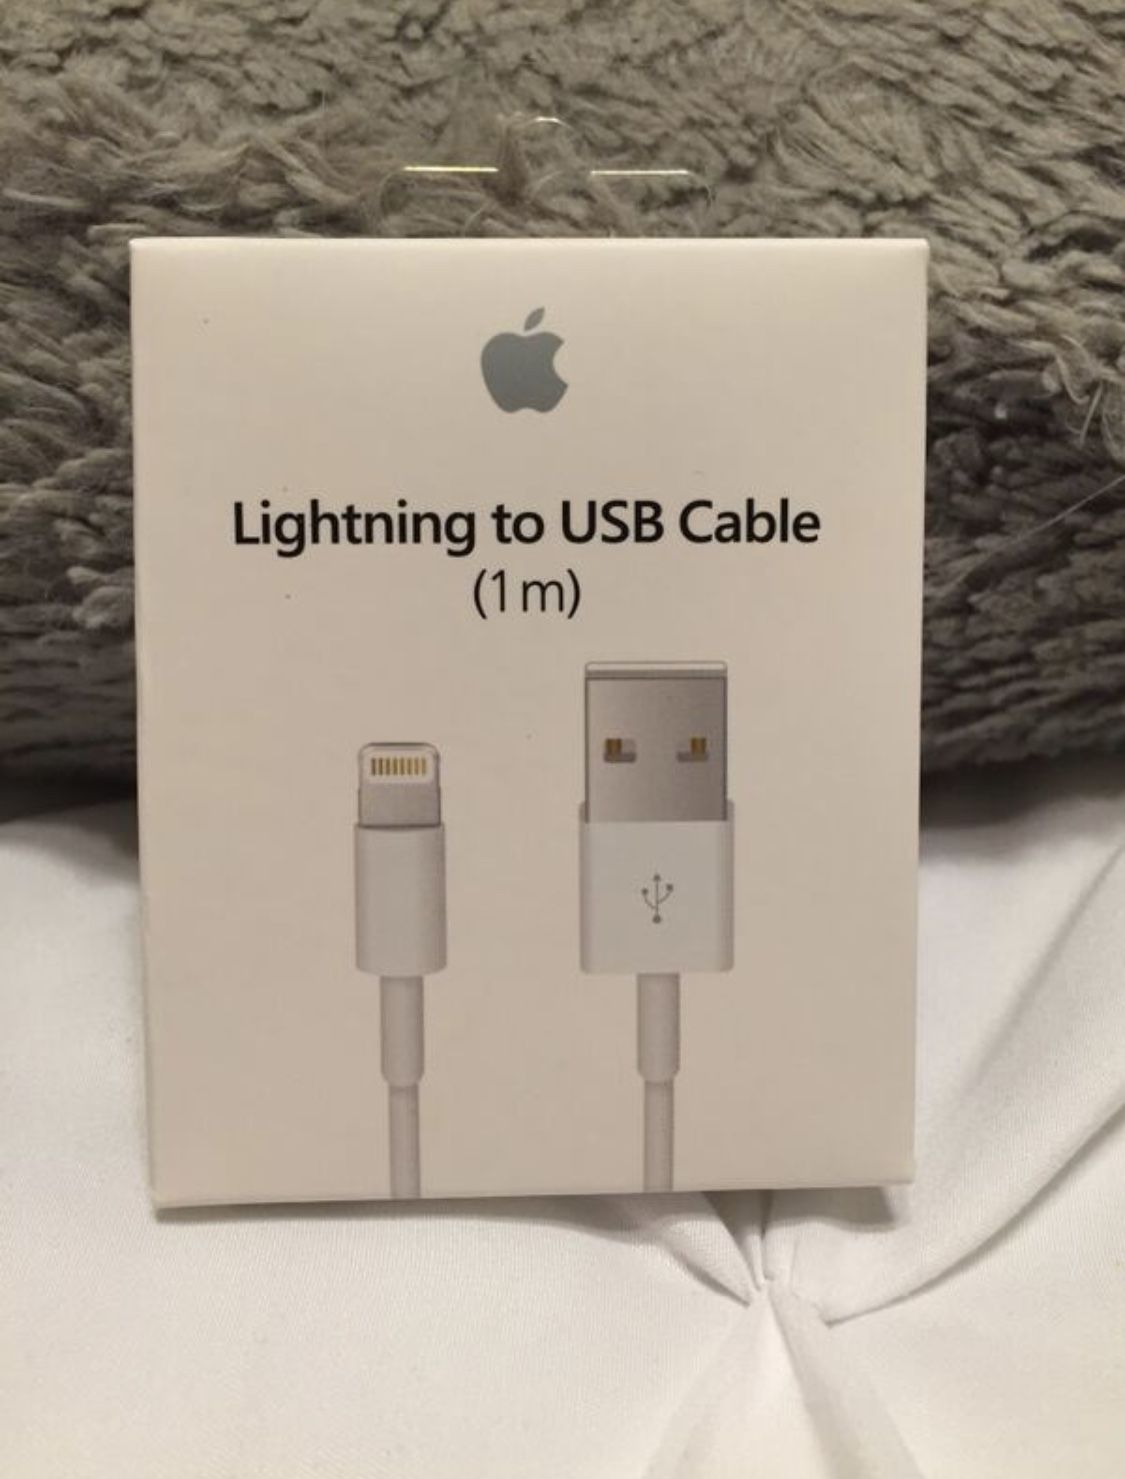 New iPhone charger cable 3 ft 